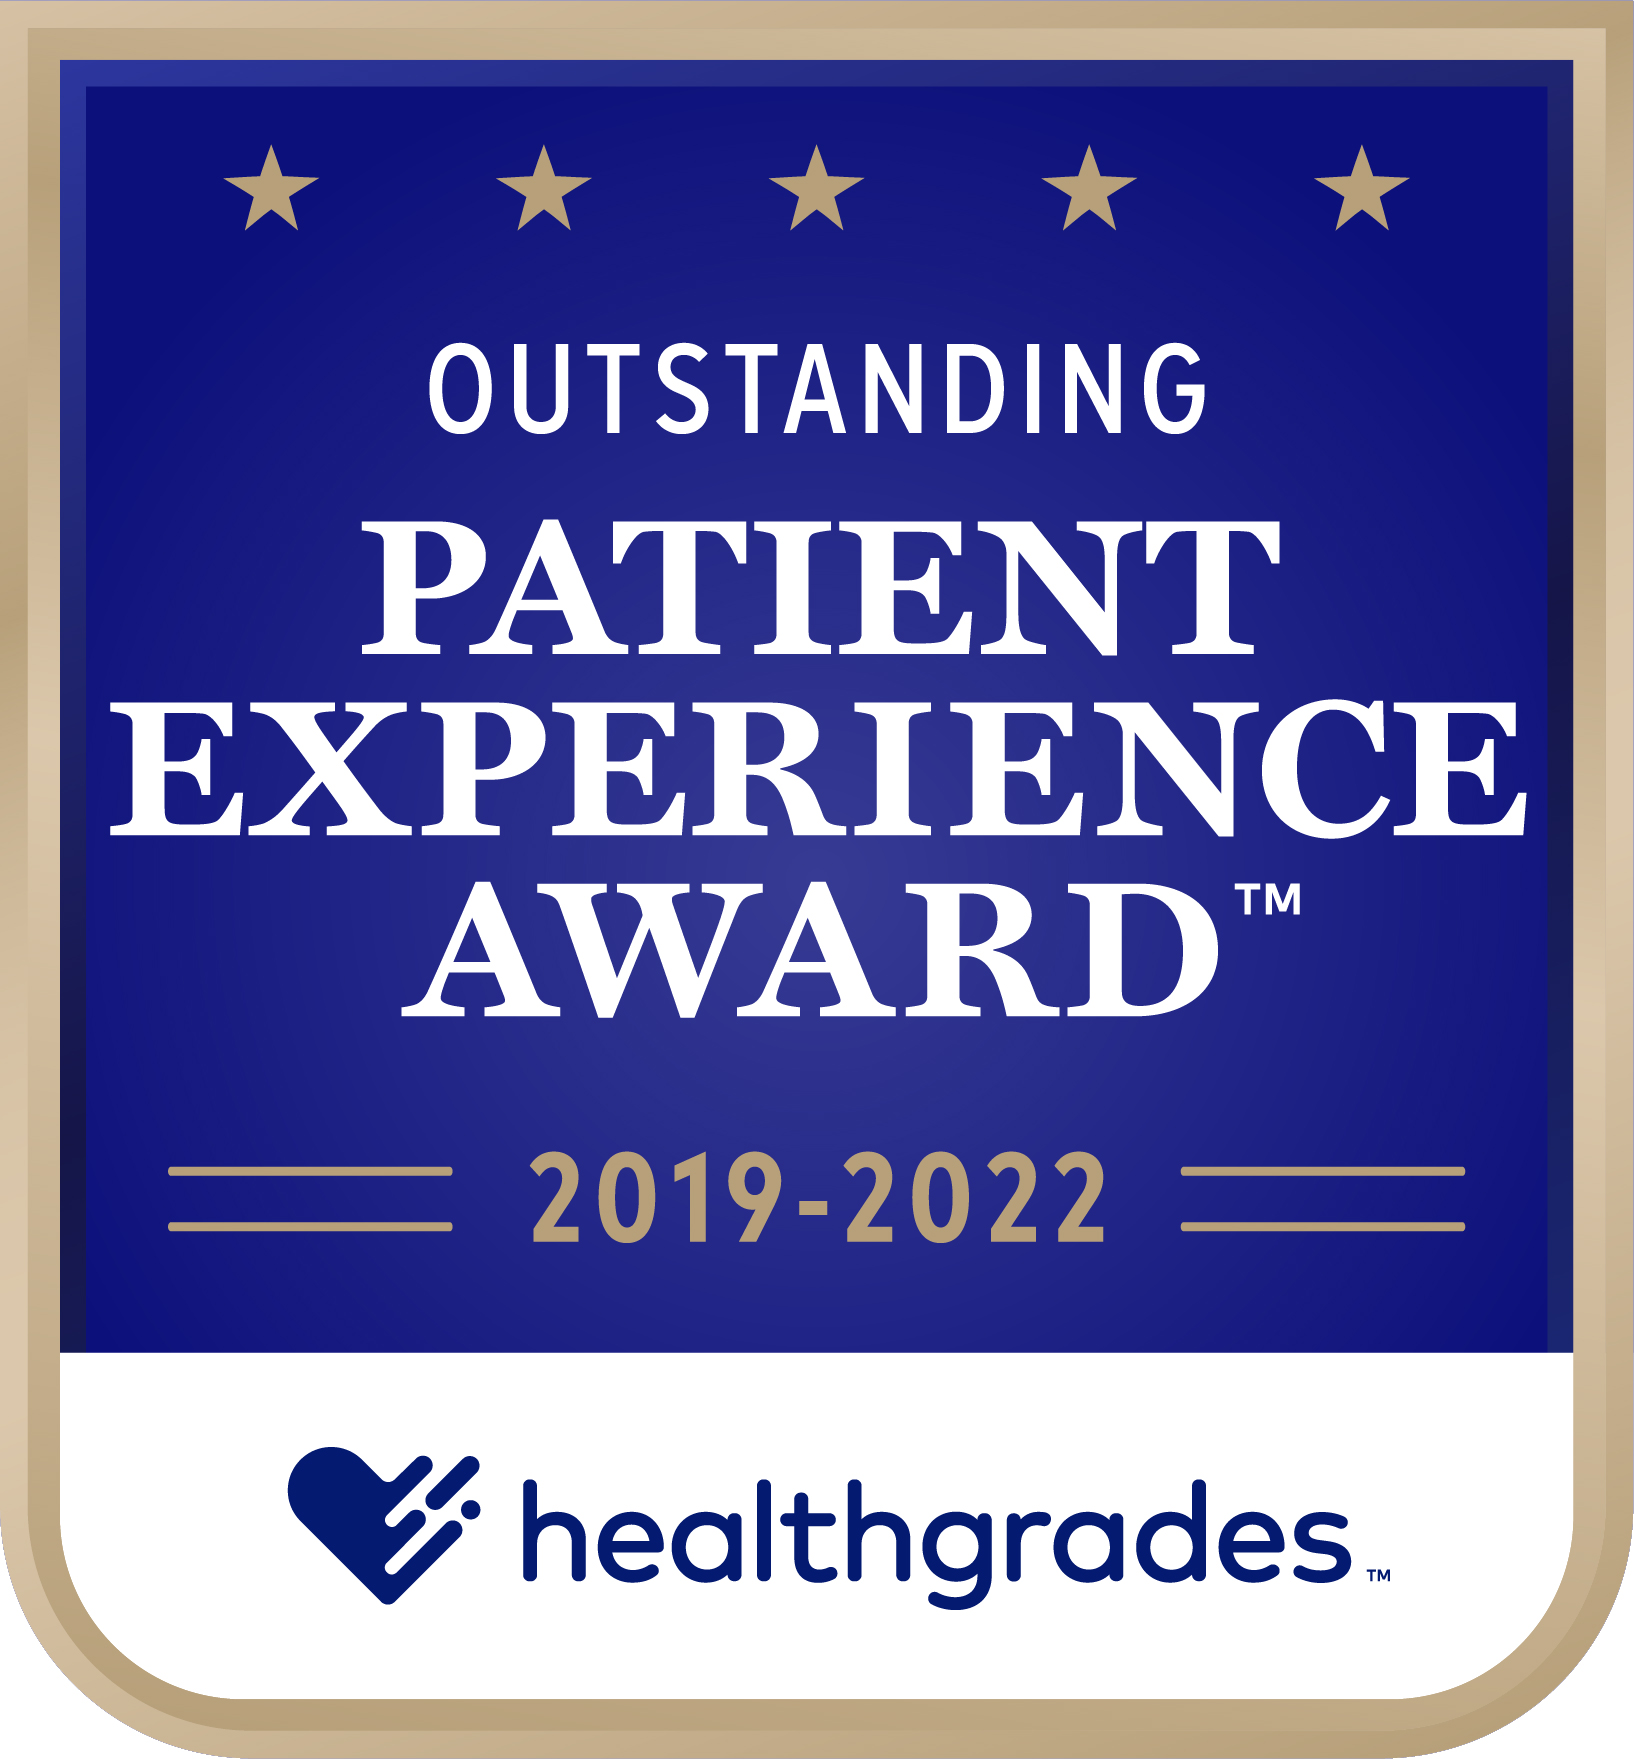 HG_Outstanding_Patient_Experience_Award_2019-2022 (1).jpg